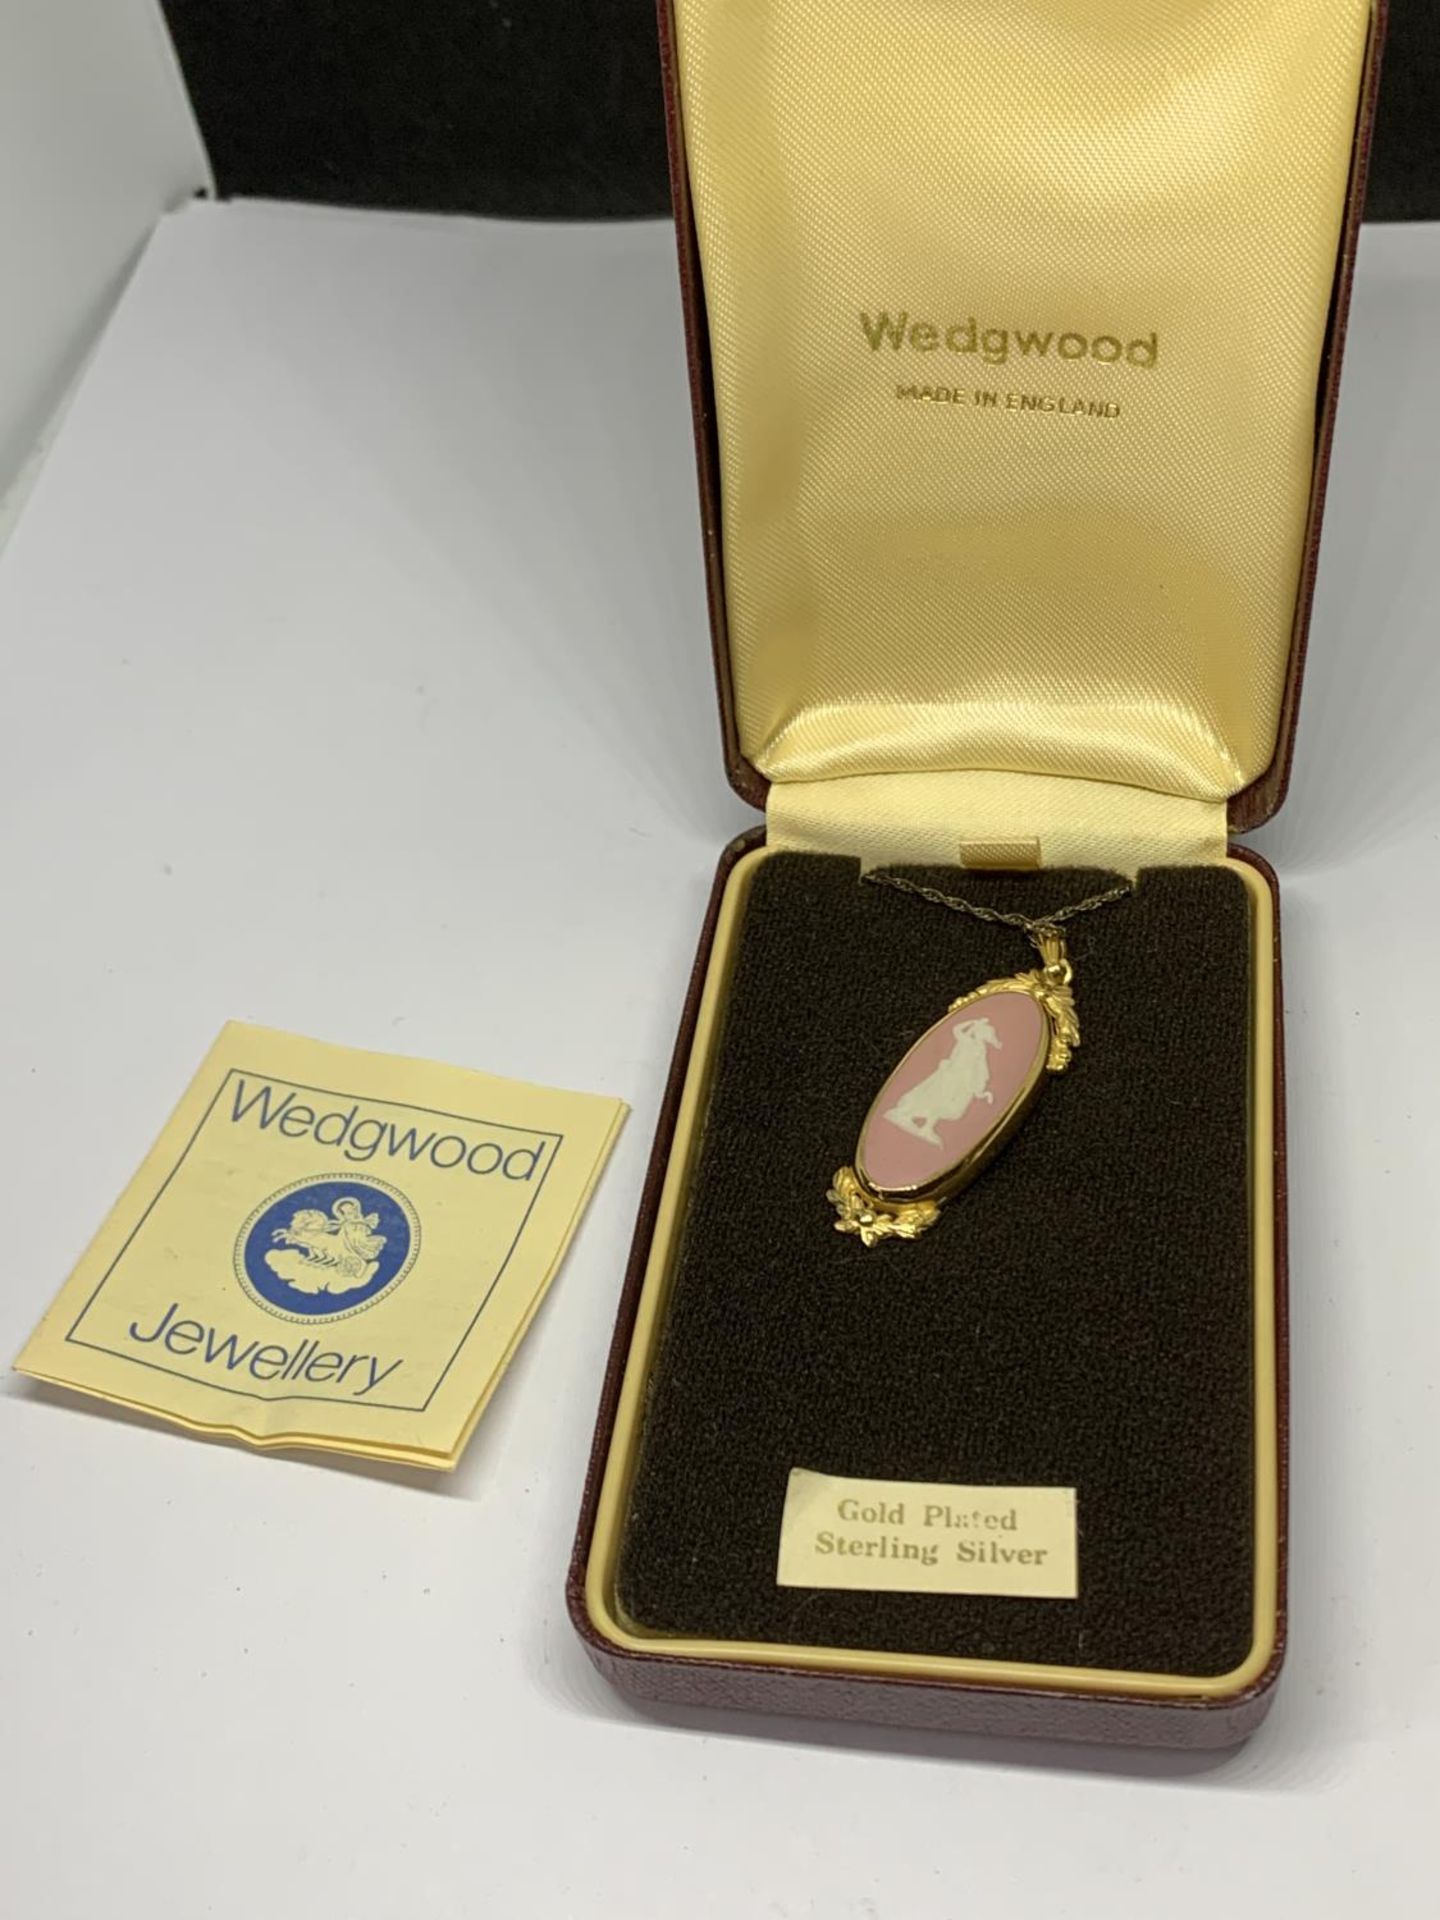 A GOLD PLATED STERLING SILVER PINK WEDGWOOD JASPERWARE PENDANT IN A PRESENTATION BOX